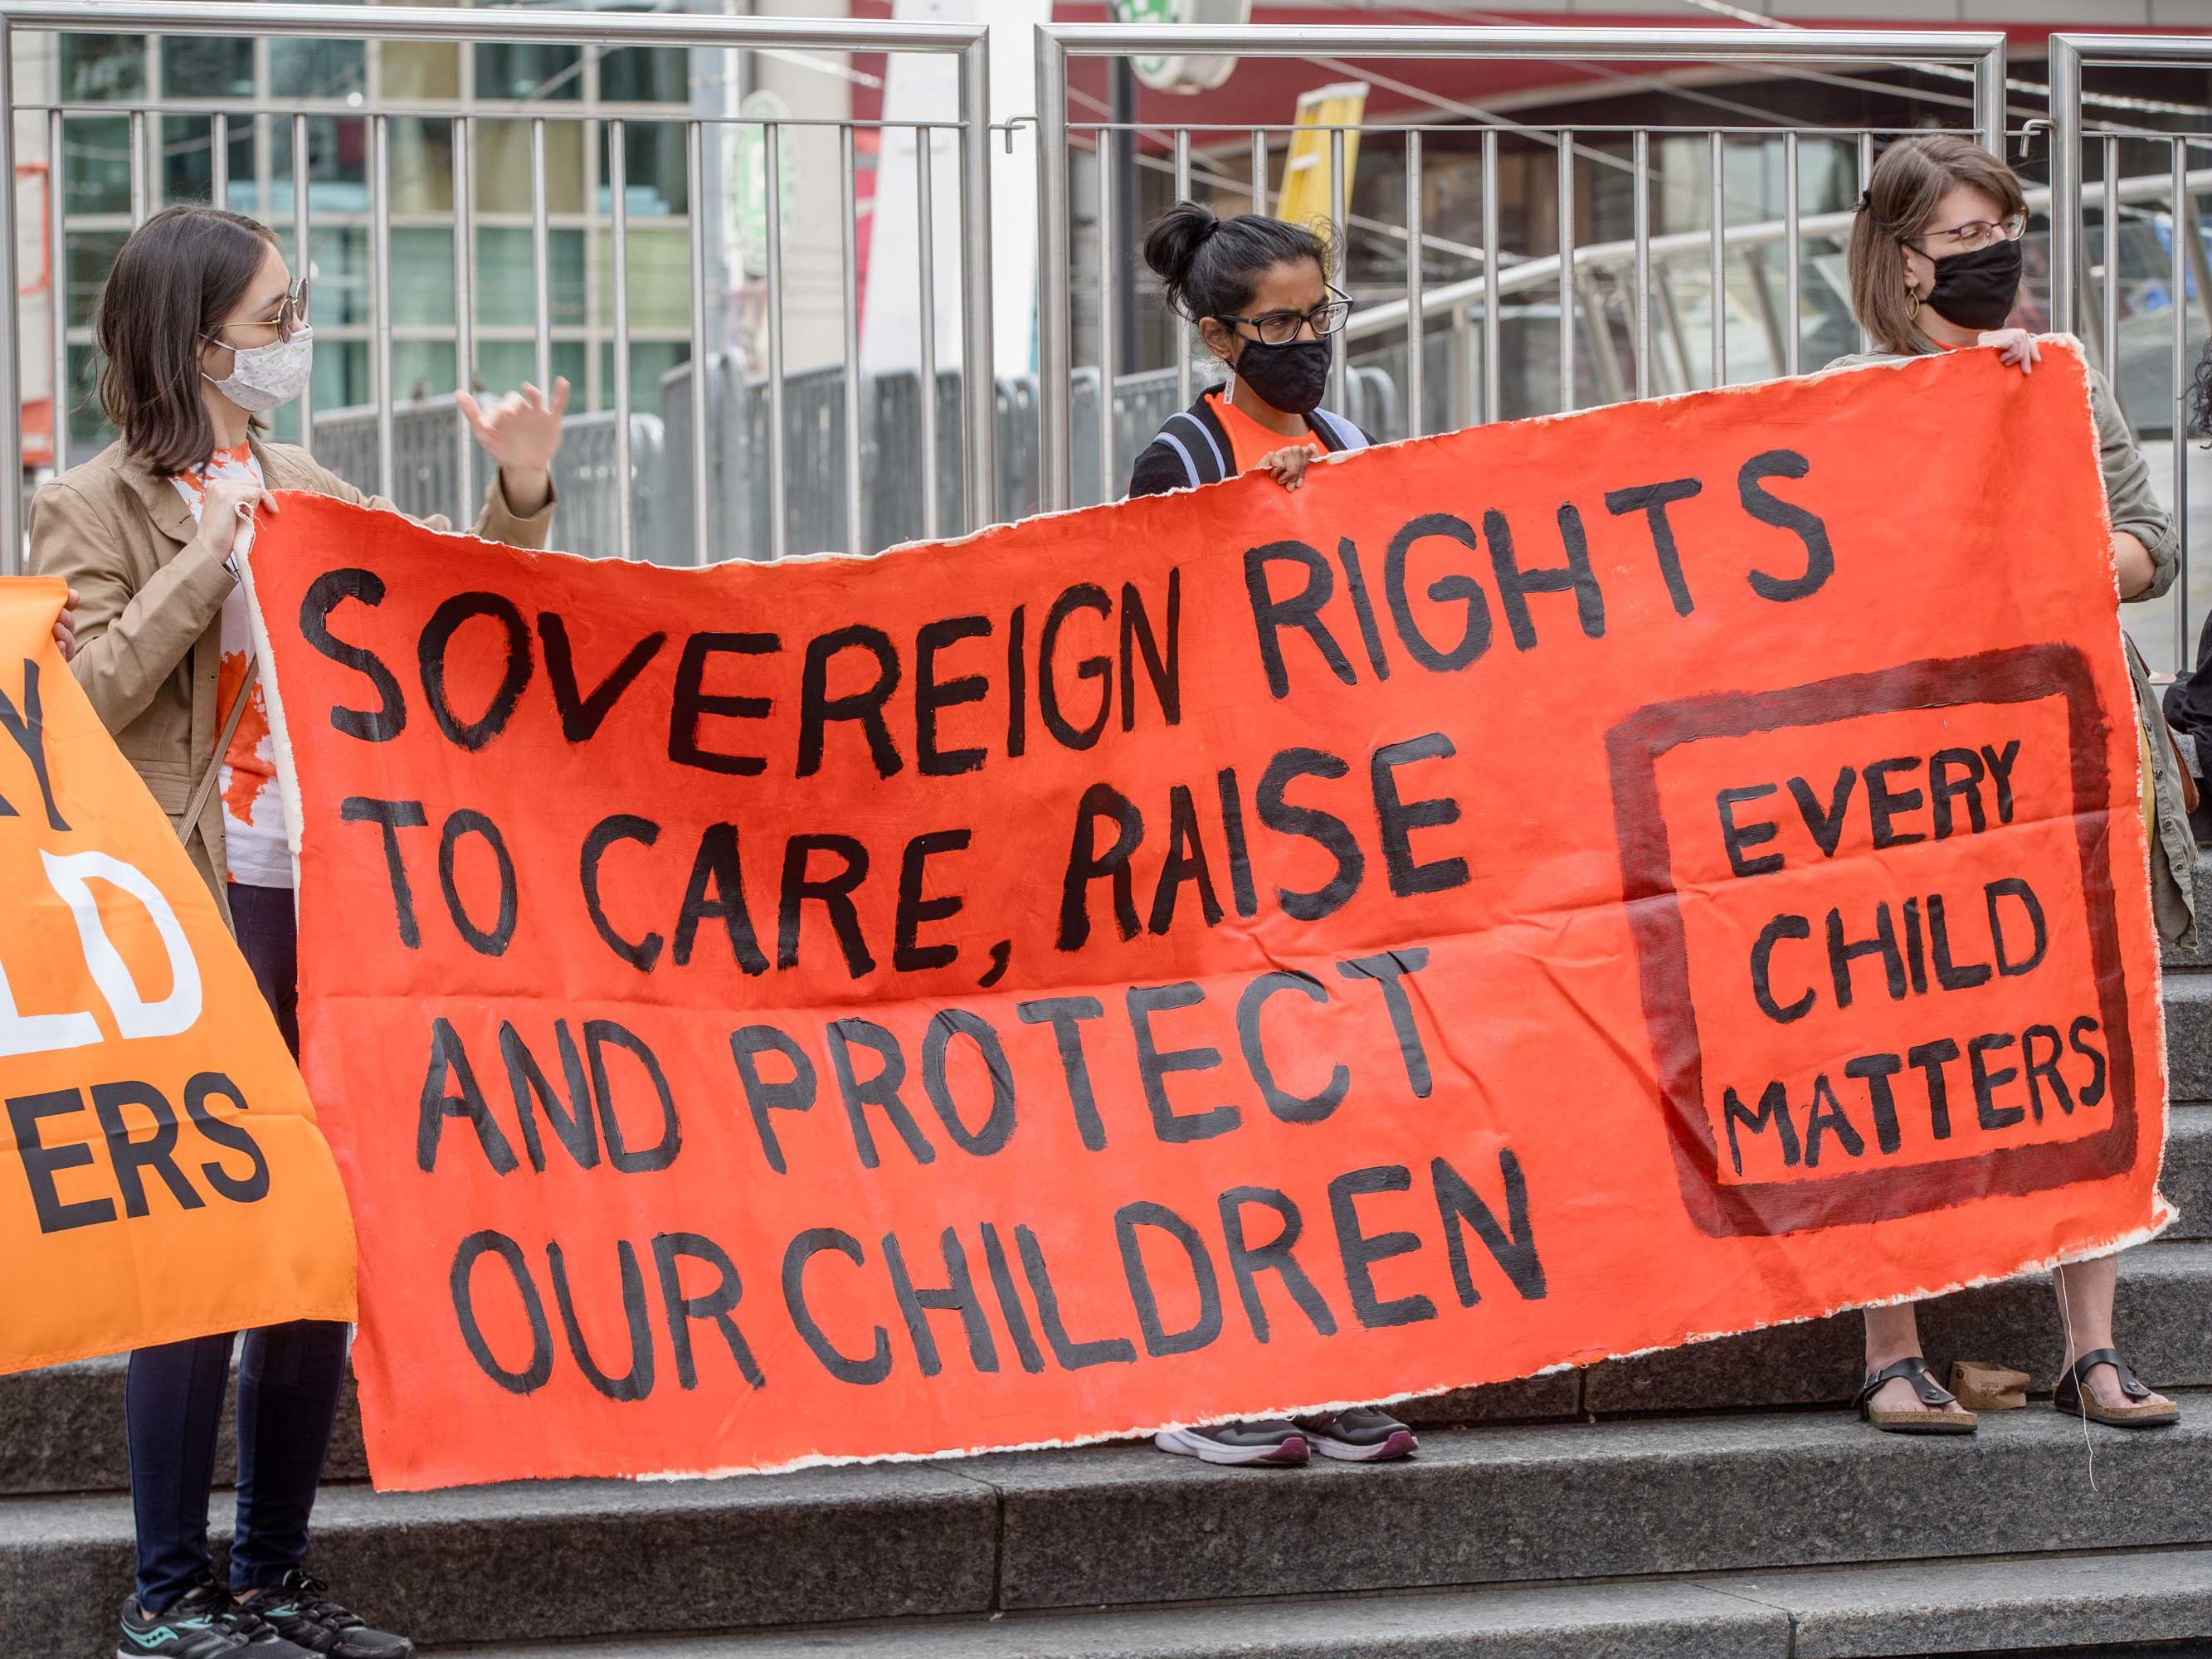 Three people stand on outdoor steps with a sign that says “Sovereign right to care, raise and protect our children” and “Every child matters.”